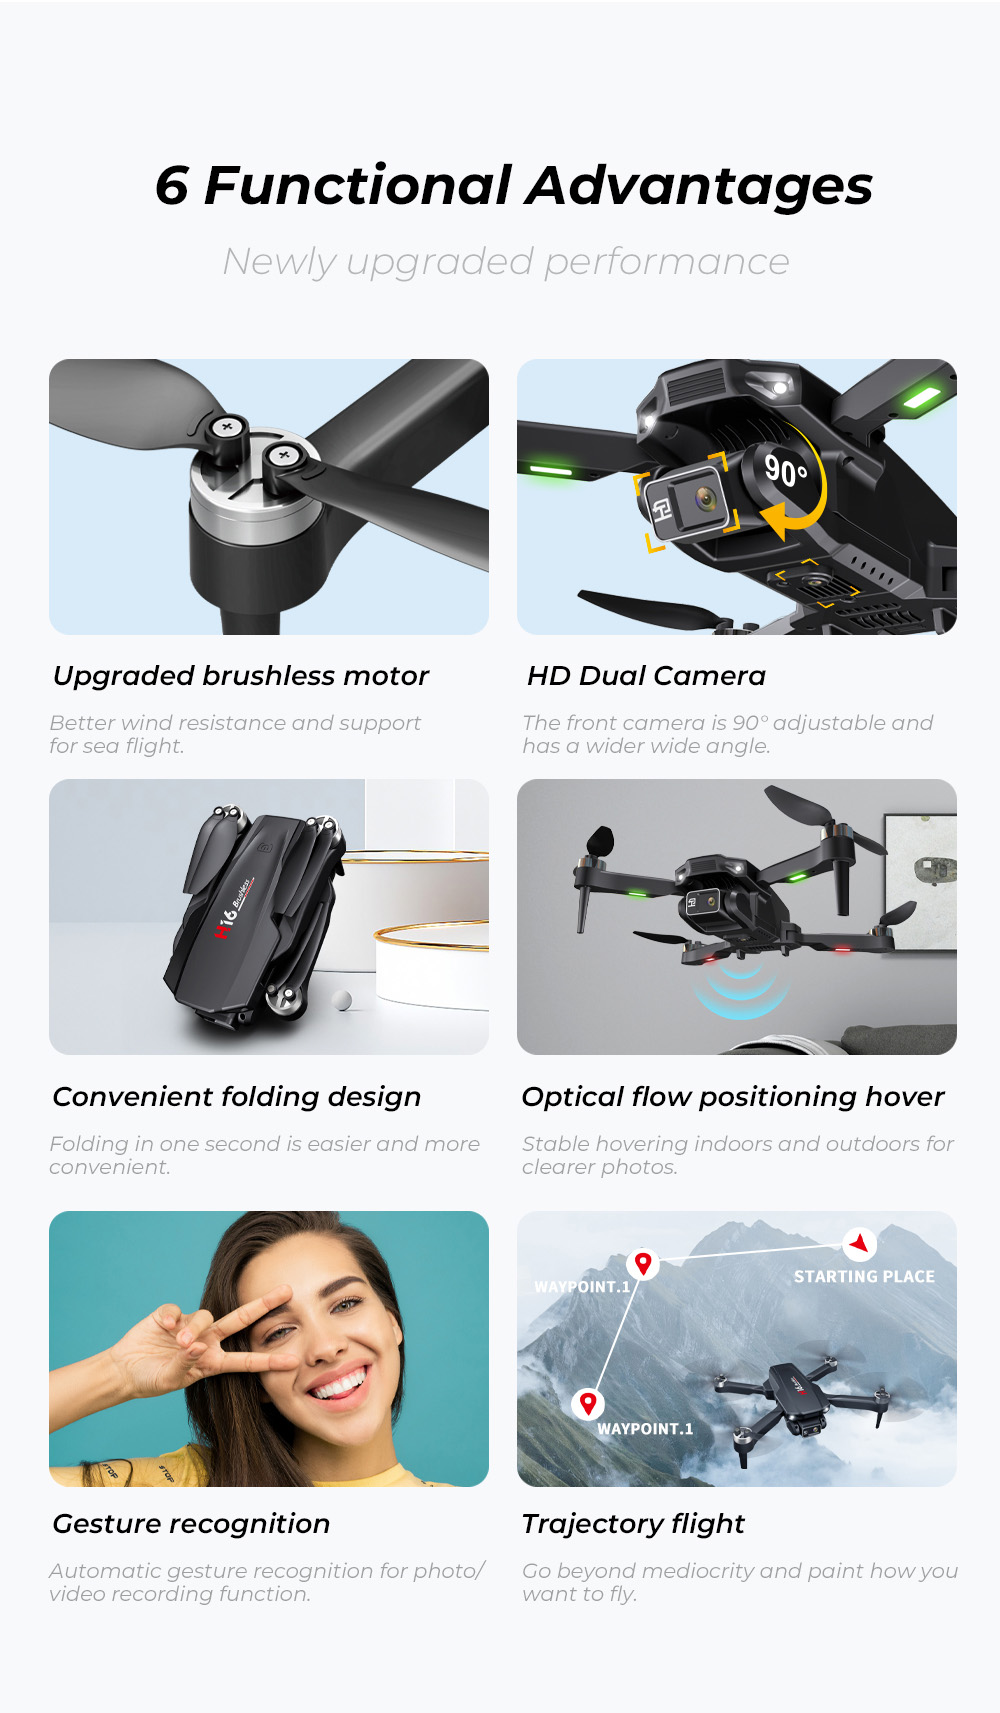 WRYX H16 Drone Brushless Motor Tumble Quadcopter HD Dual Camera Drone RC Optical Flow Hover Helicopter Gift UAV details 2